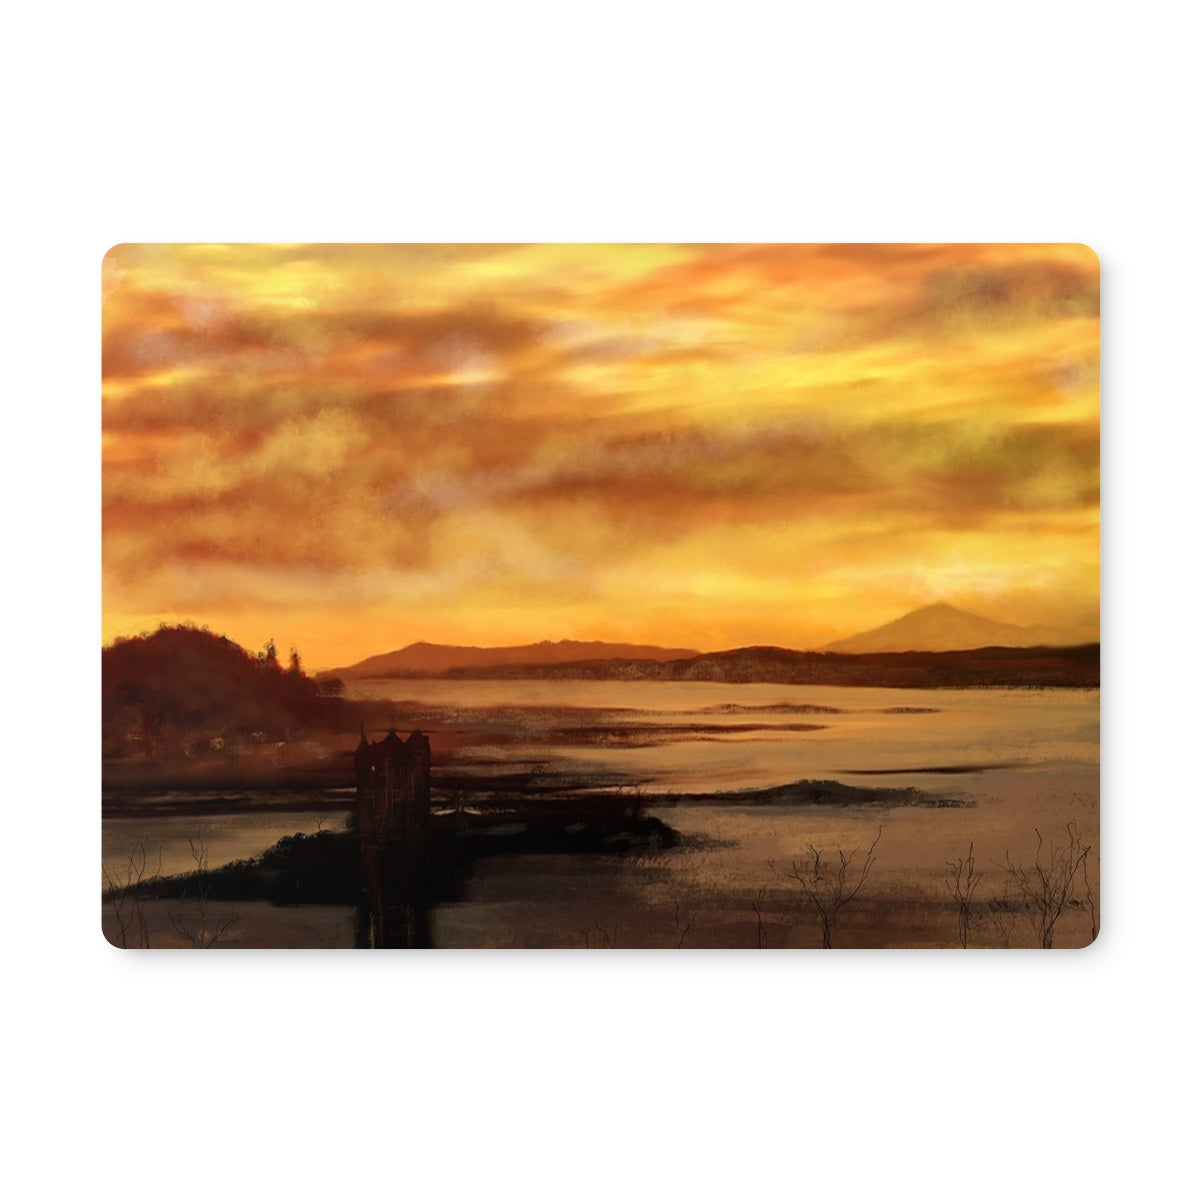 Castle Stalker Dusk Art Gifts Placemat-Placemats-Historic & Iconic Scotland Art Gallery-Single Placemat-Paintings, Prints, Homeware, Art Gifts From Scotland By Scottish Artist Kevin Hunter